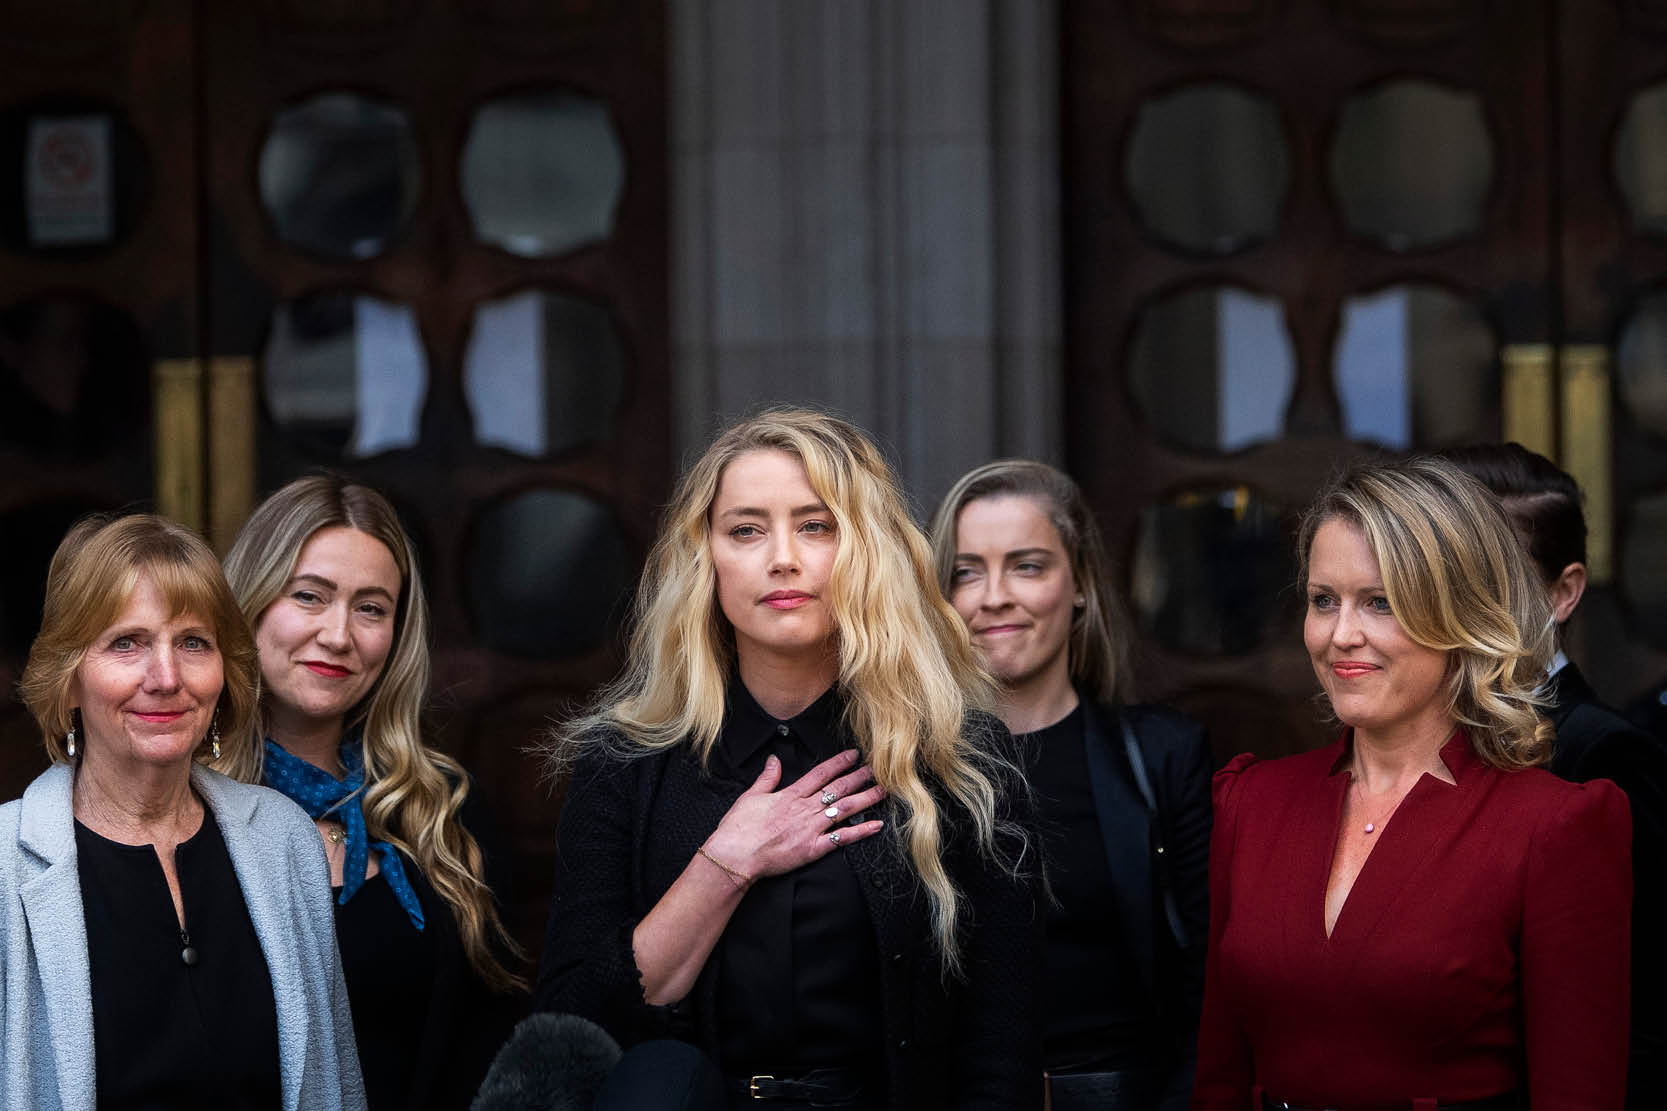 Actress Amber Heard, alongside her sister Whitney Henriquez (second right) and lawyer Jen Robinson (right), as she gives a statement outside the High Court in London on the final day of hearings in Johnny Depp's libel case against the publishers of The Sun